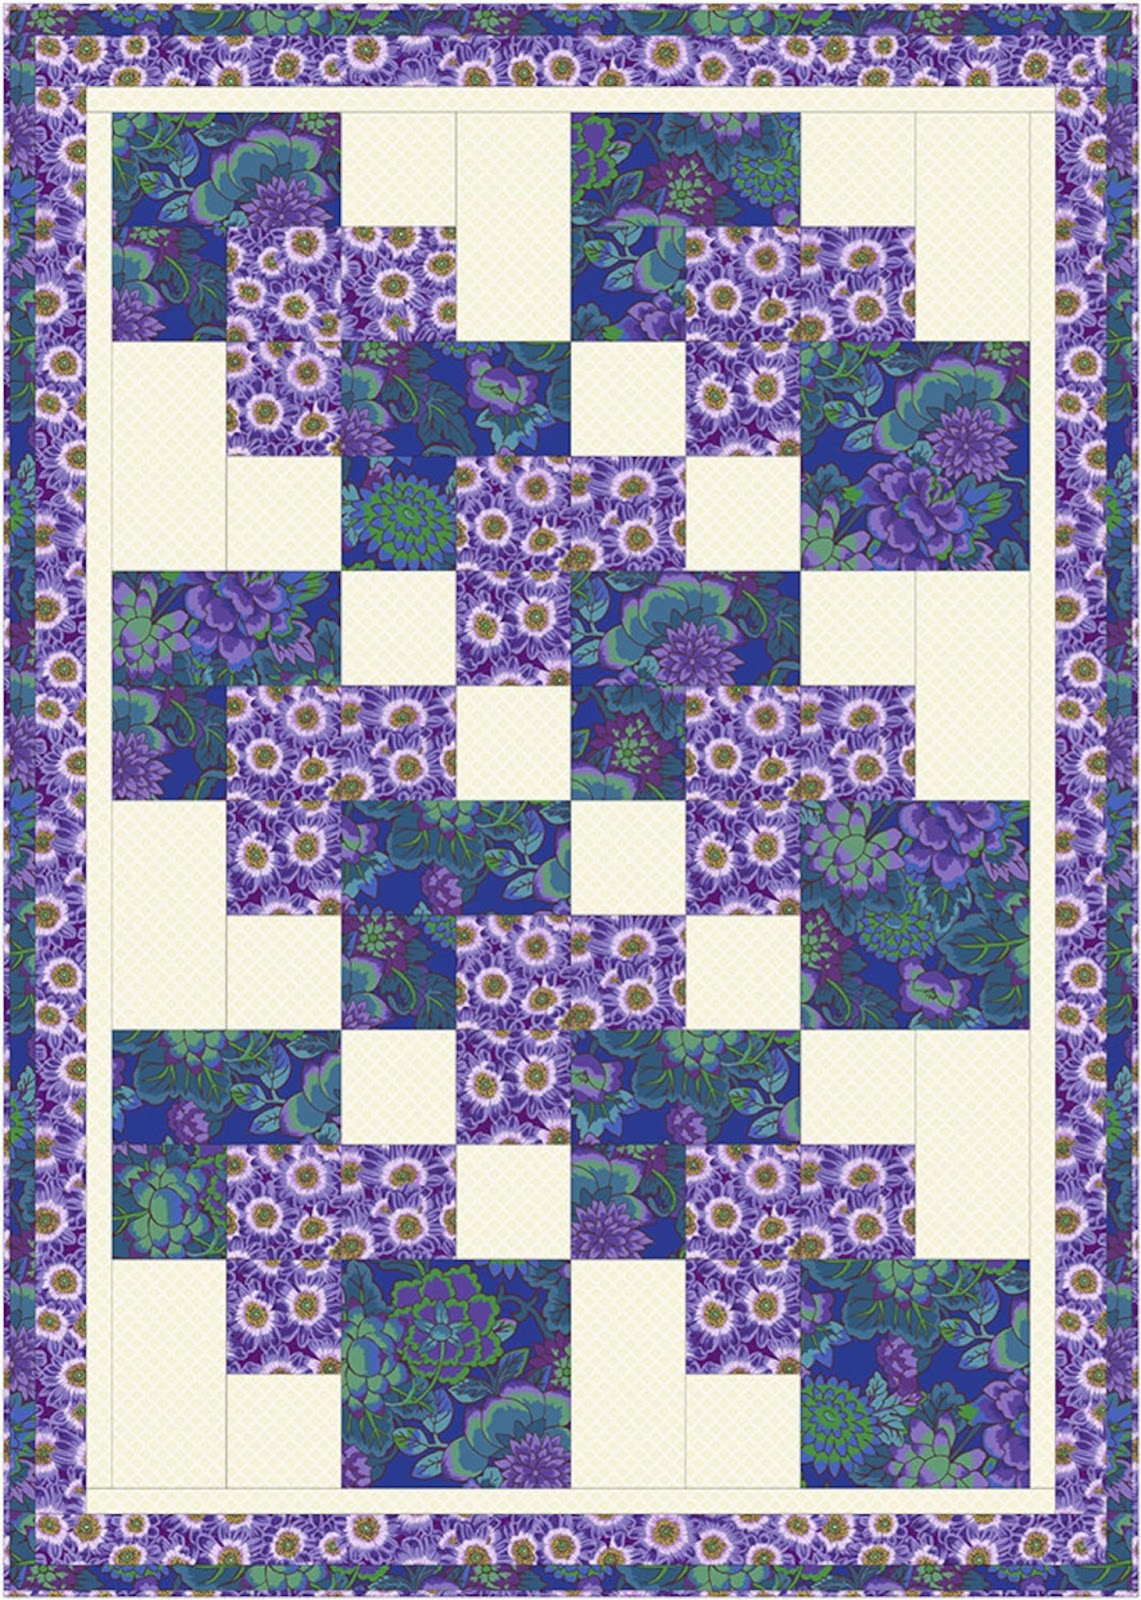 It's a snap 3-Yard Quilt Patterns 